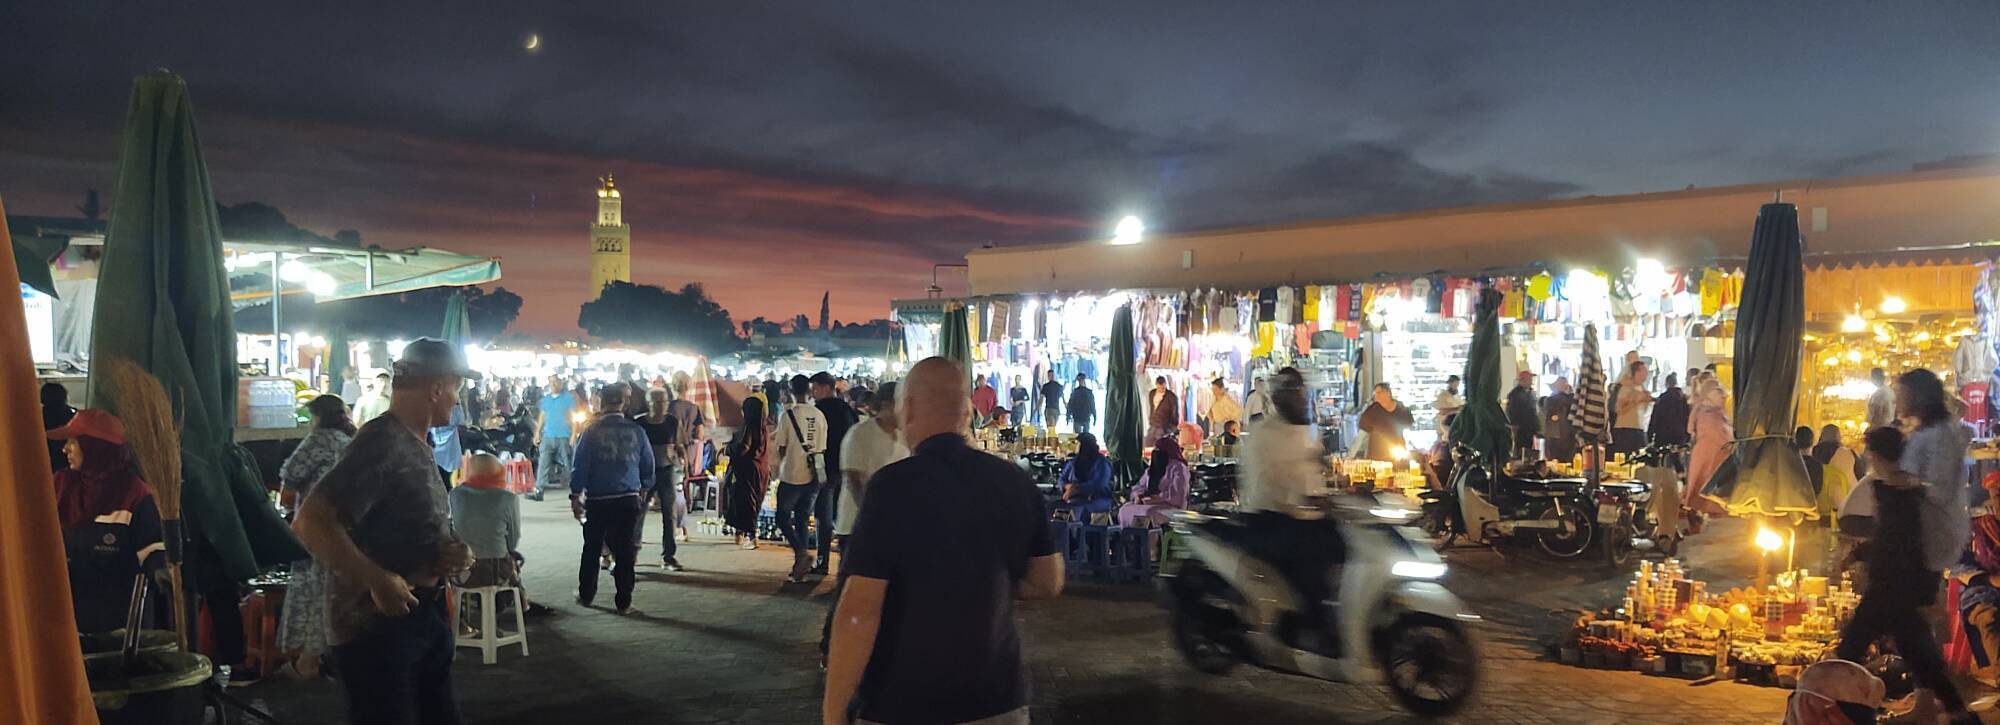 Vendors, cooks, and visitors on the Jemaa el-Fnaa in Marrakech. In the background, a crescent moon shines above the minaret of the Kutubiyya Mosque.